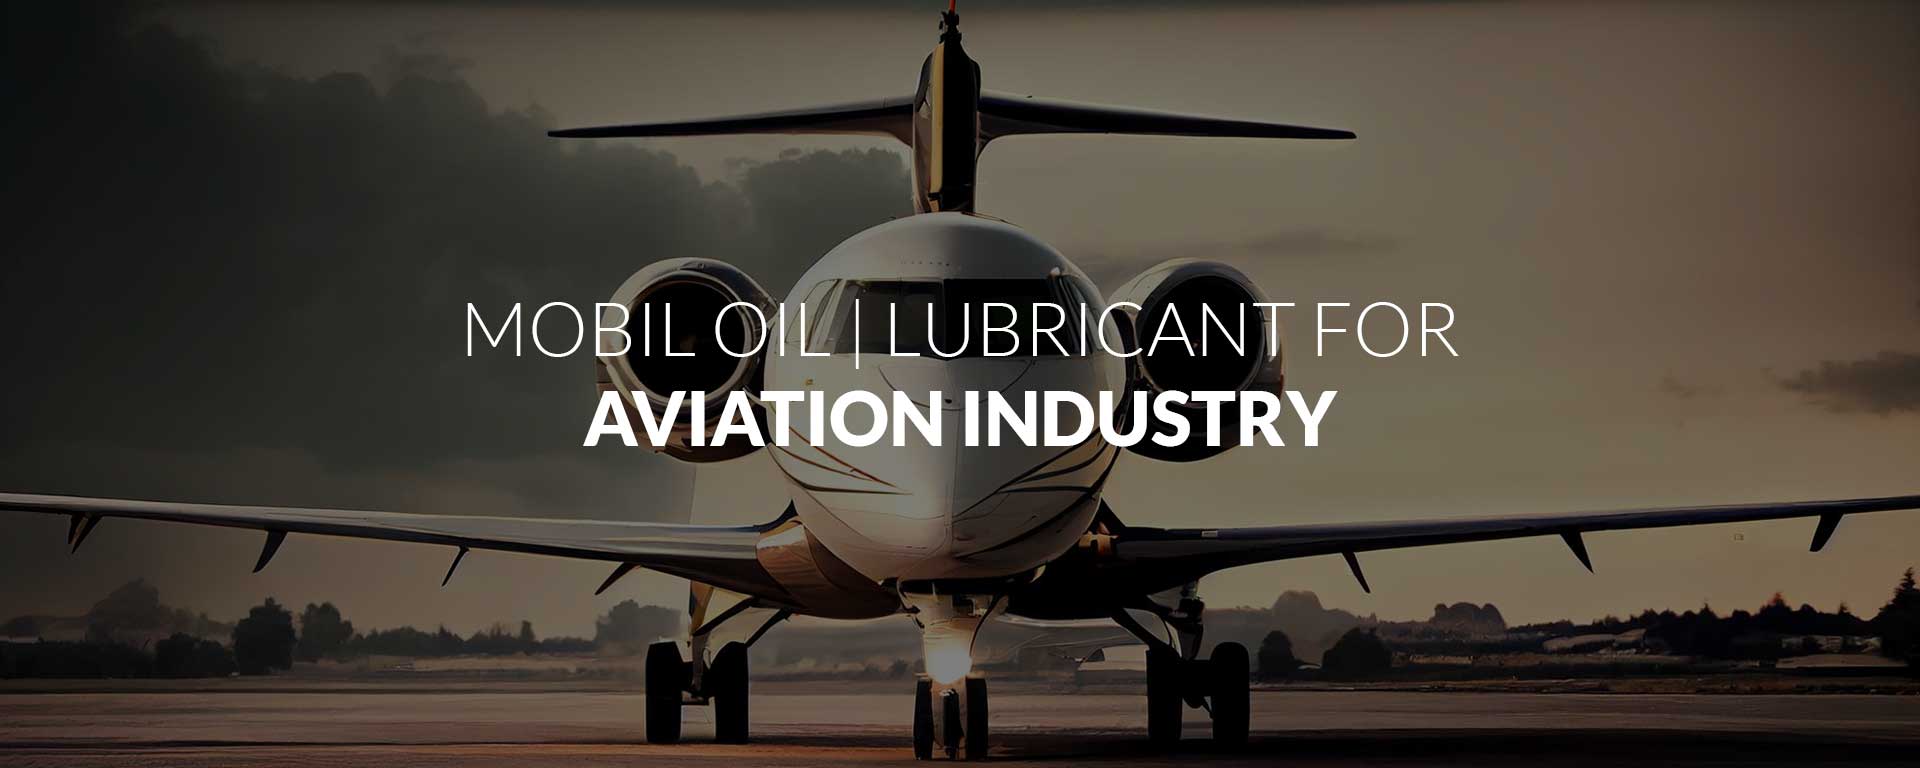 mobil-aviation-oil-and-lubricant-supplier-in-uae